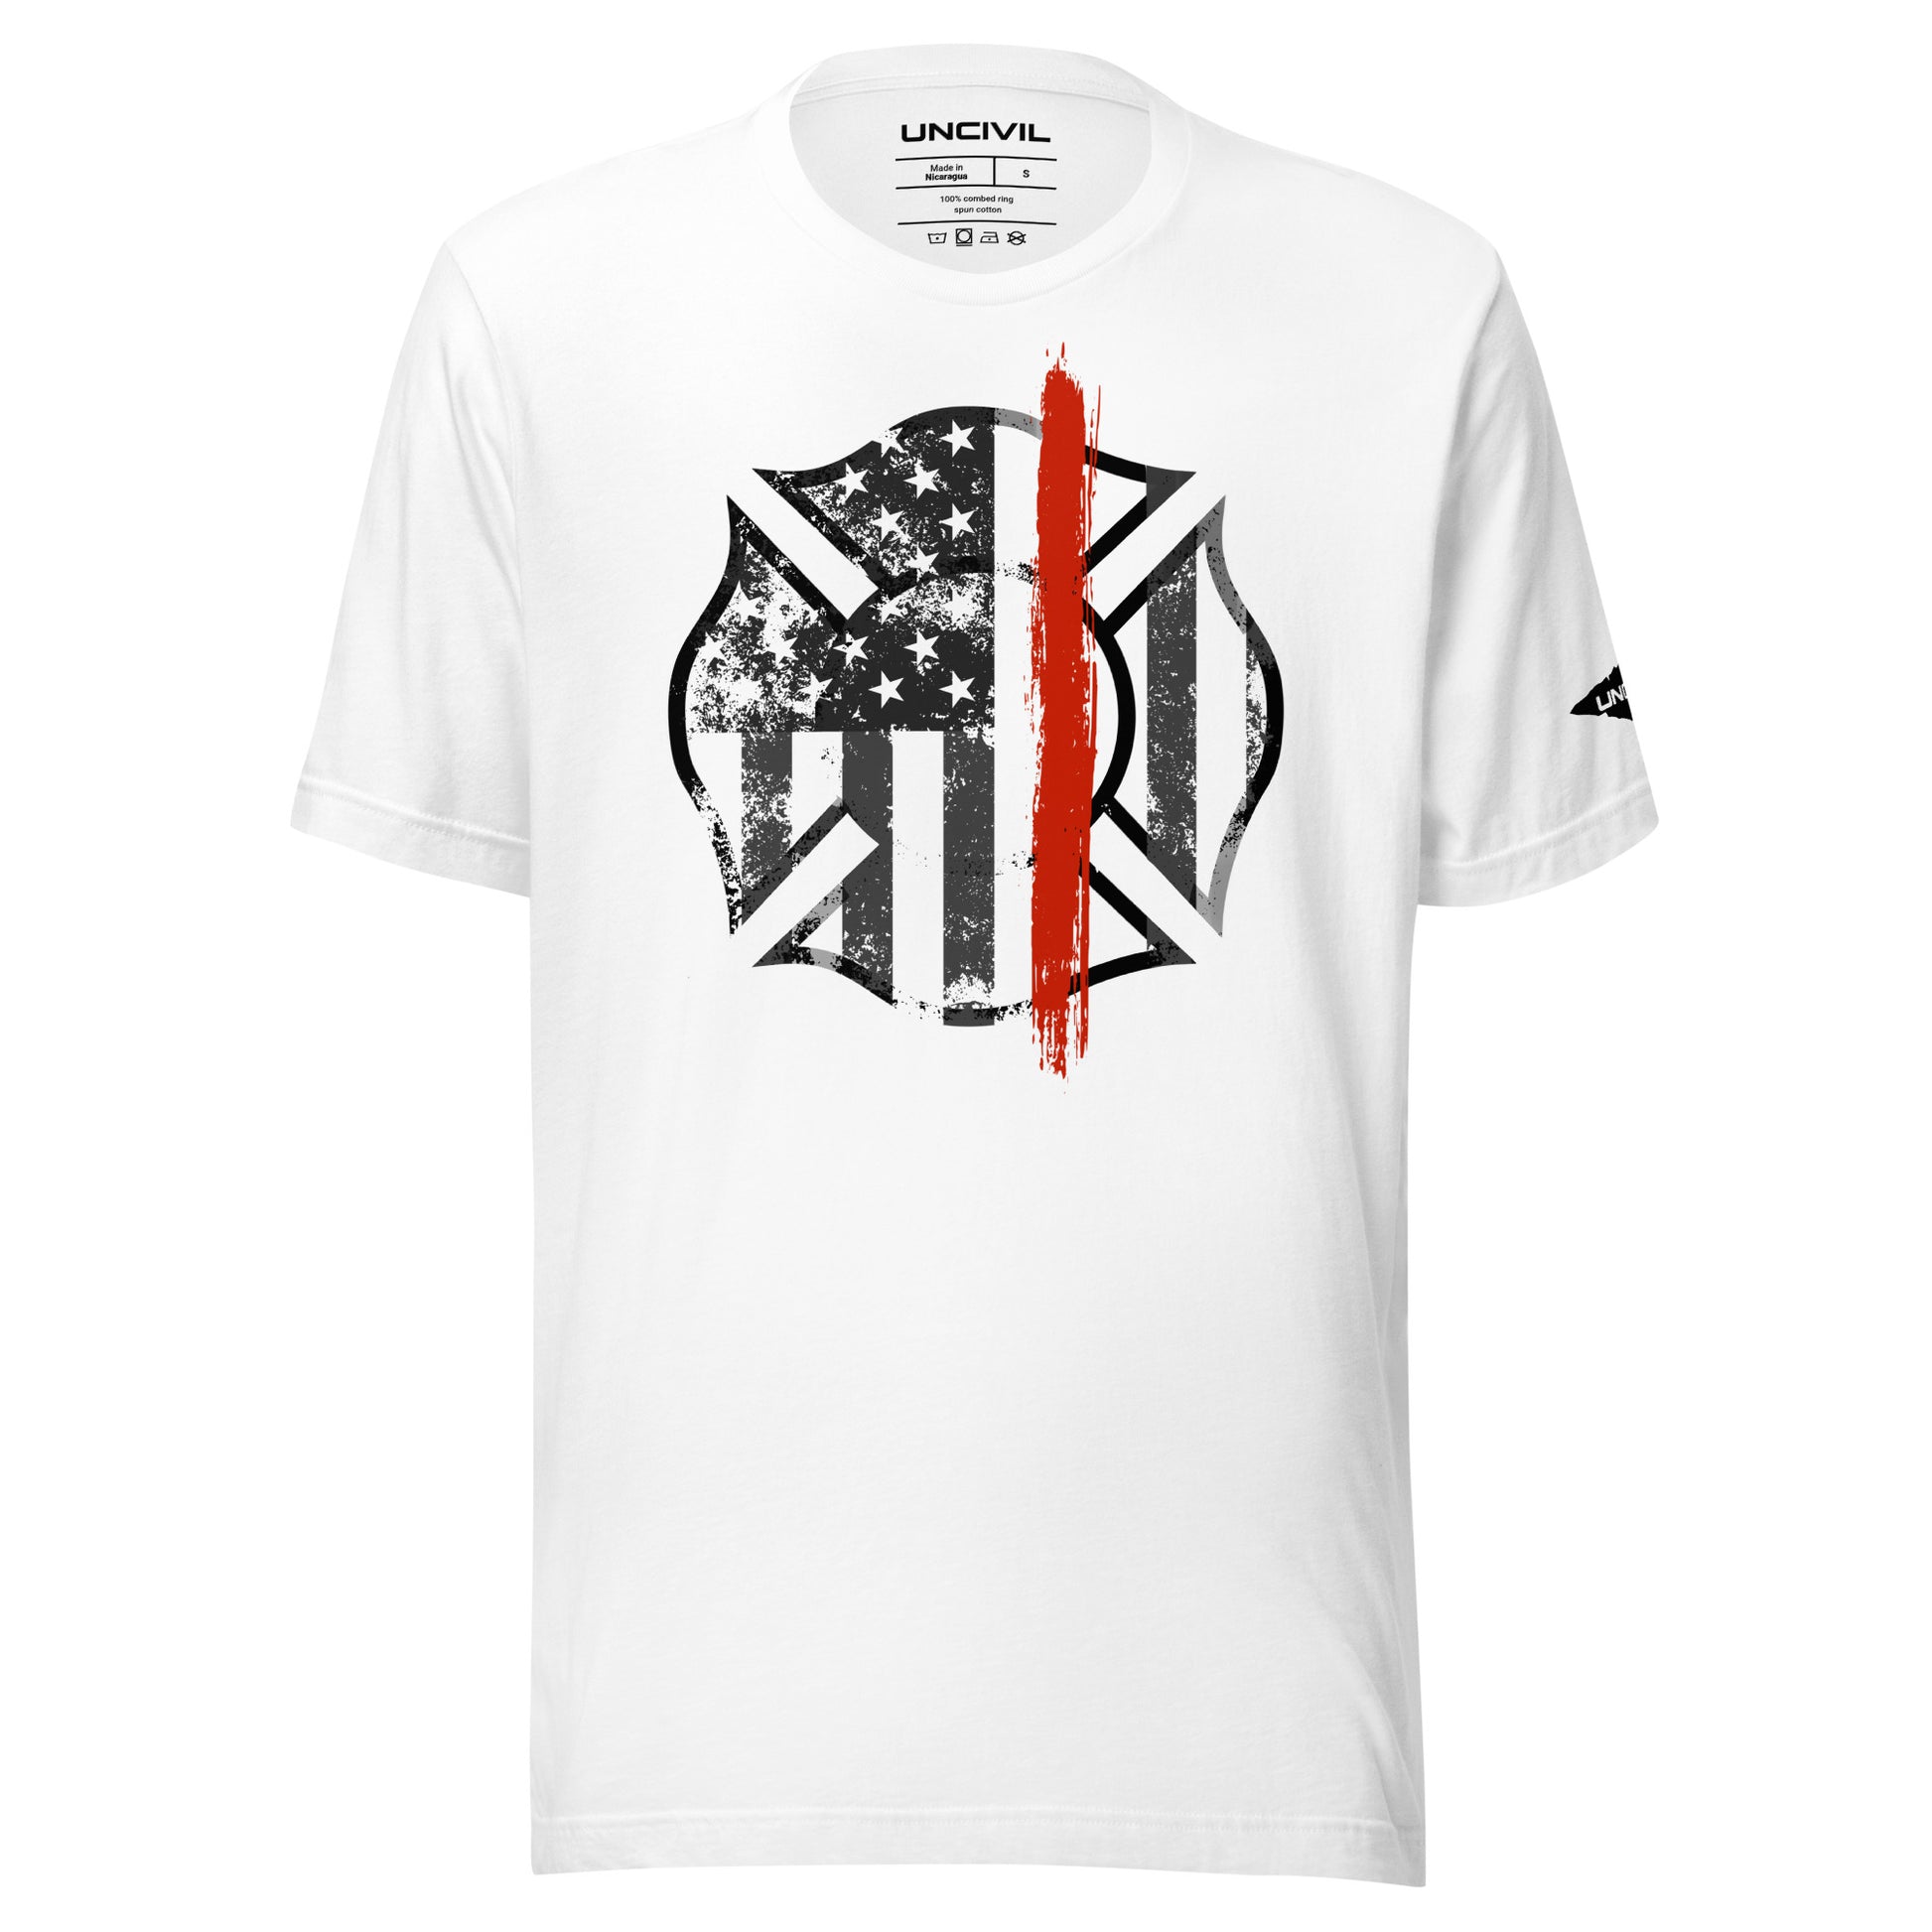 Back the Red t-shirt. Firefighter Thin Red Line shirt in White.